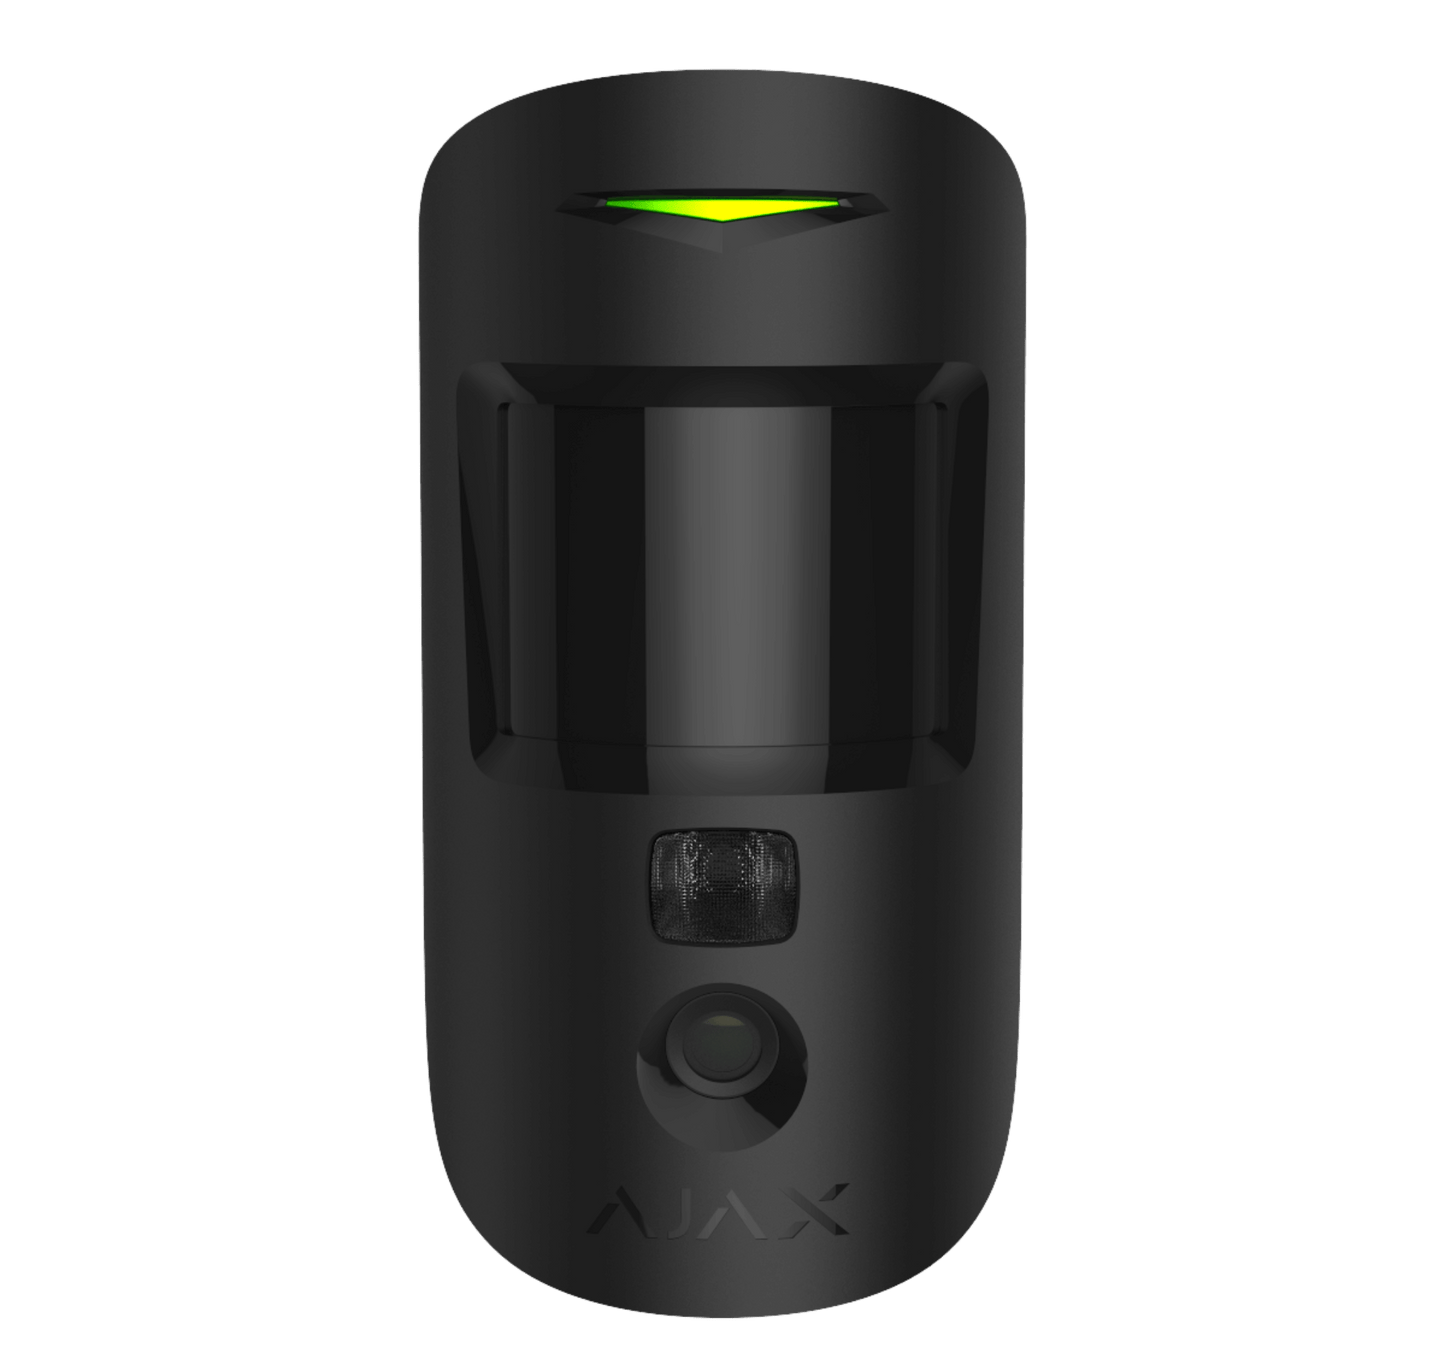 Black Ajax MotionCam a wireless motion detector with a built in camera for home and business security, 110 × 65 × 50 mm in size, 86 grams in weight. front view of device